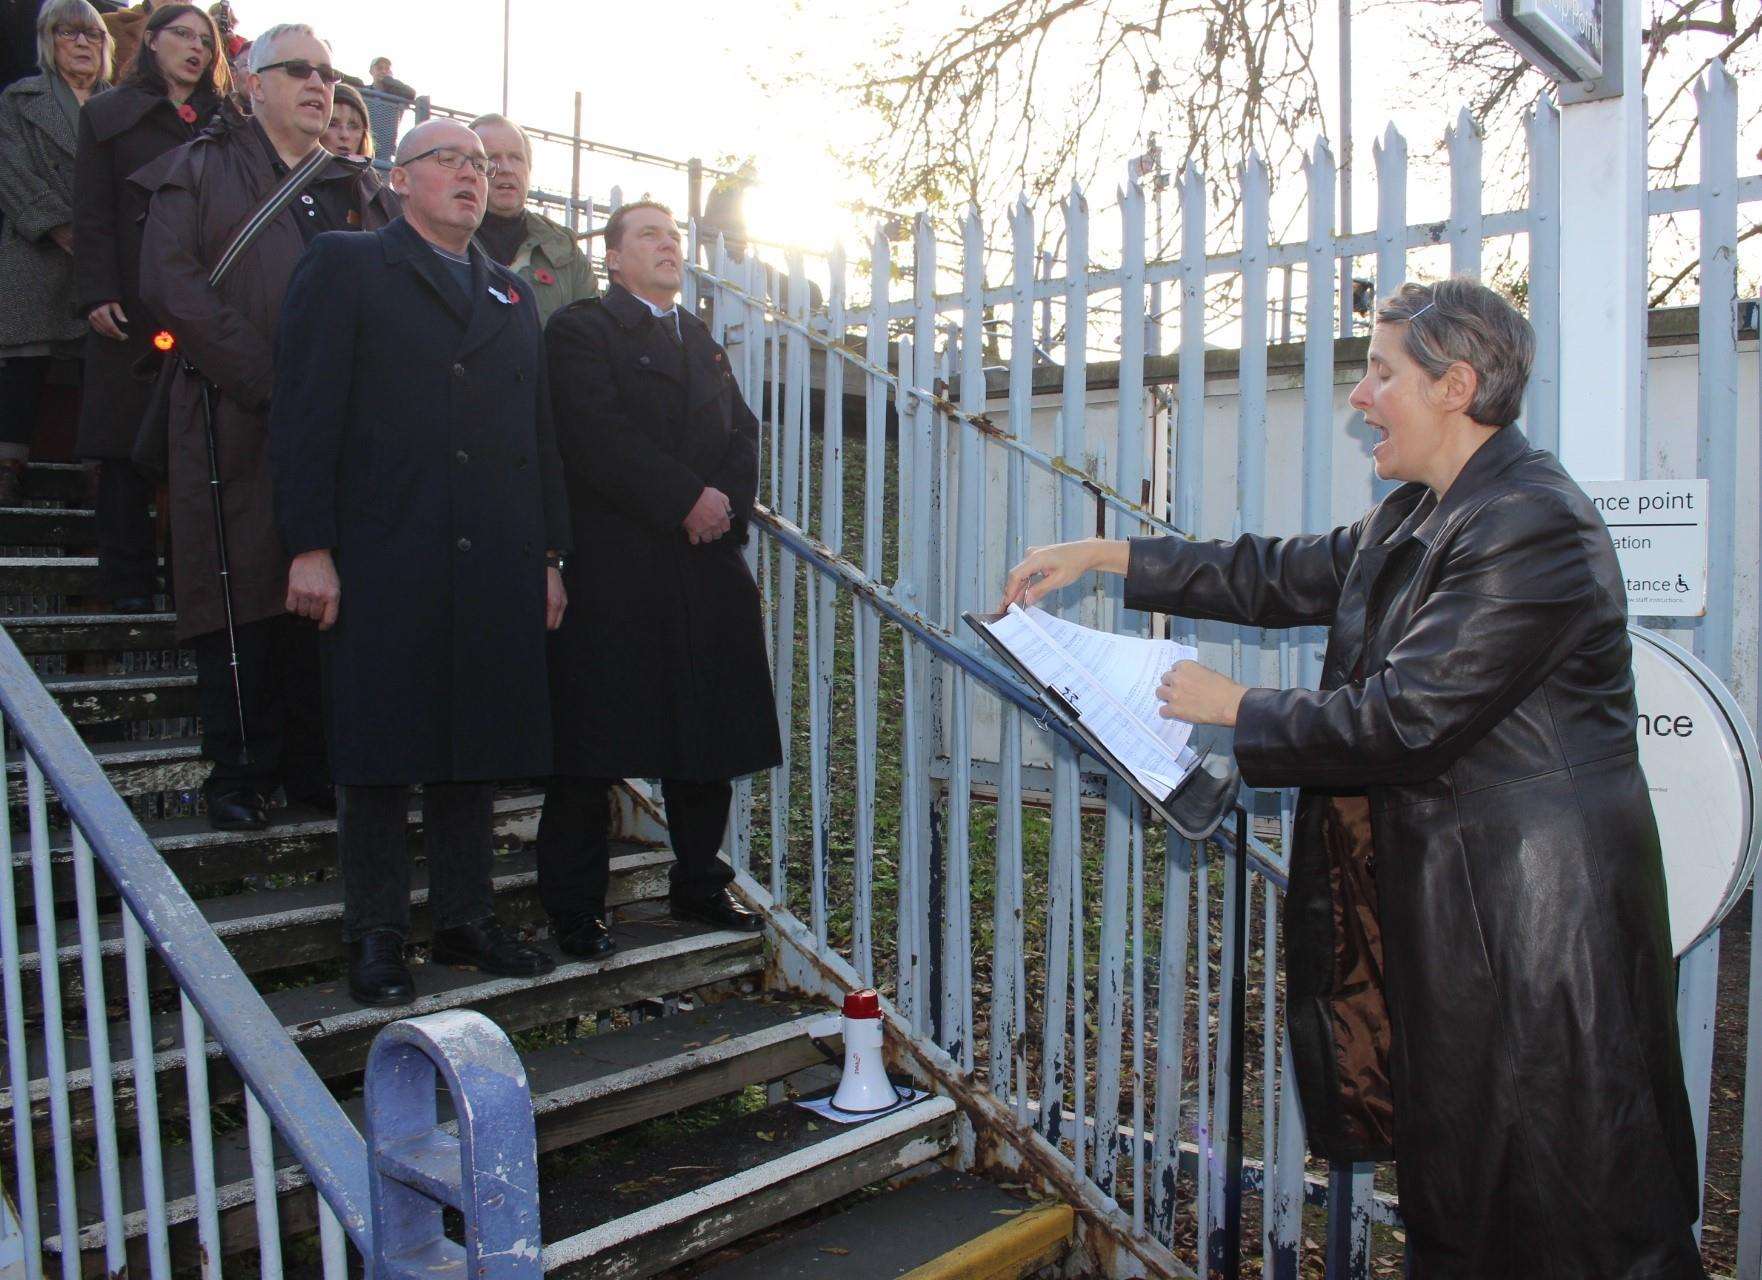 Tania Holland-Williams conducts the 55-plus choir at Queenborough train station on Sunday performing Never Again. Picture: John Nurden (5337053)